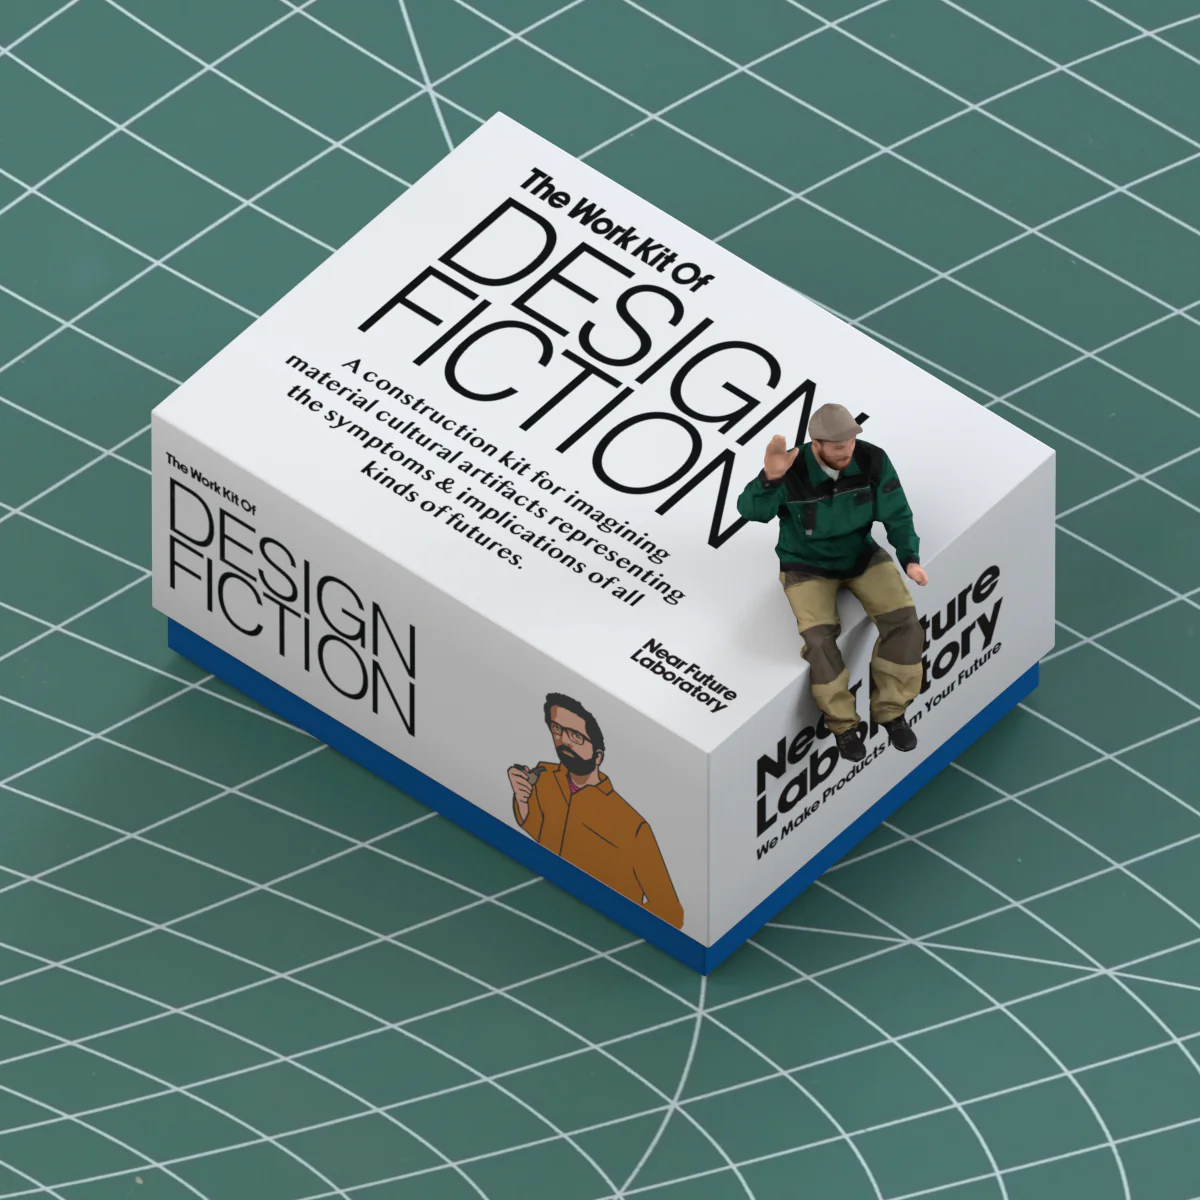 The Work Kit of Design Fiction Online Edition